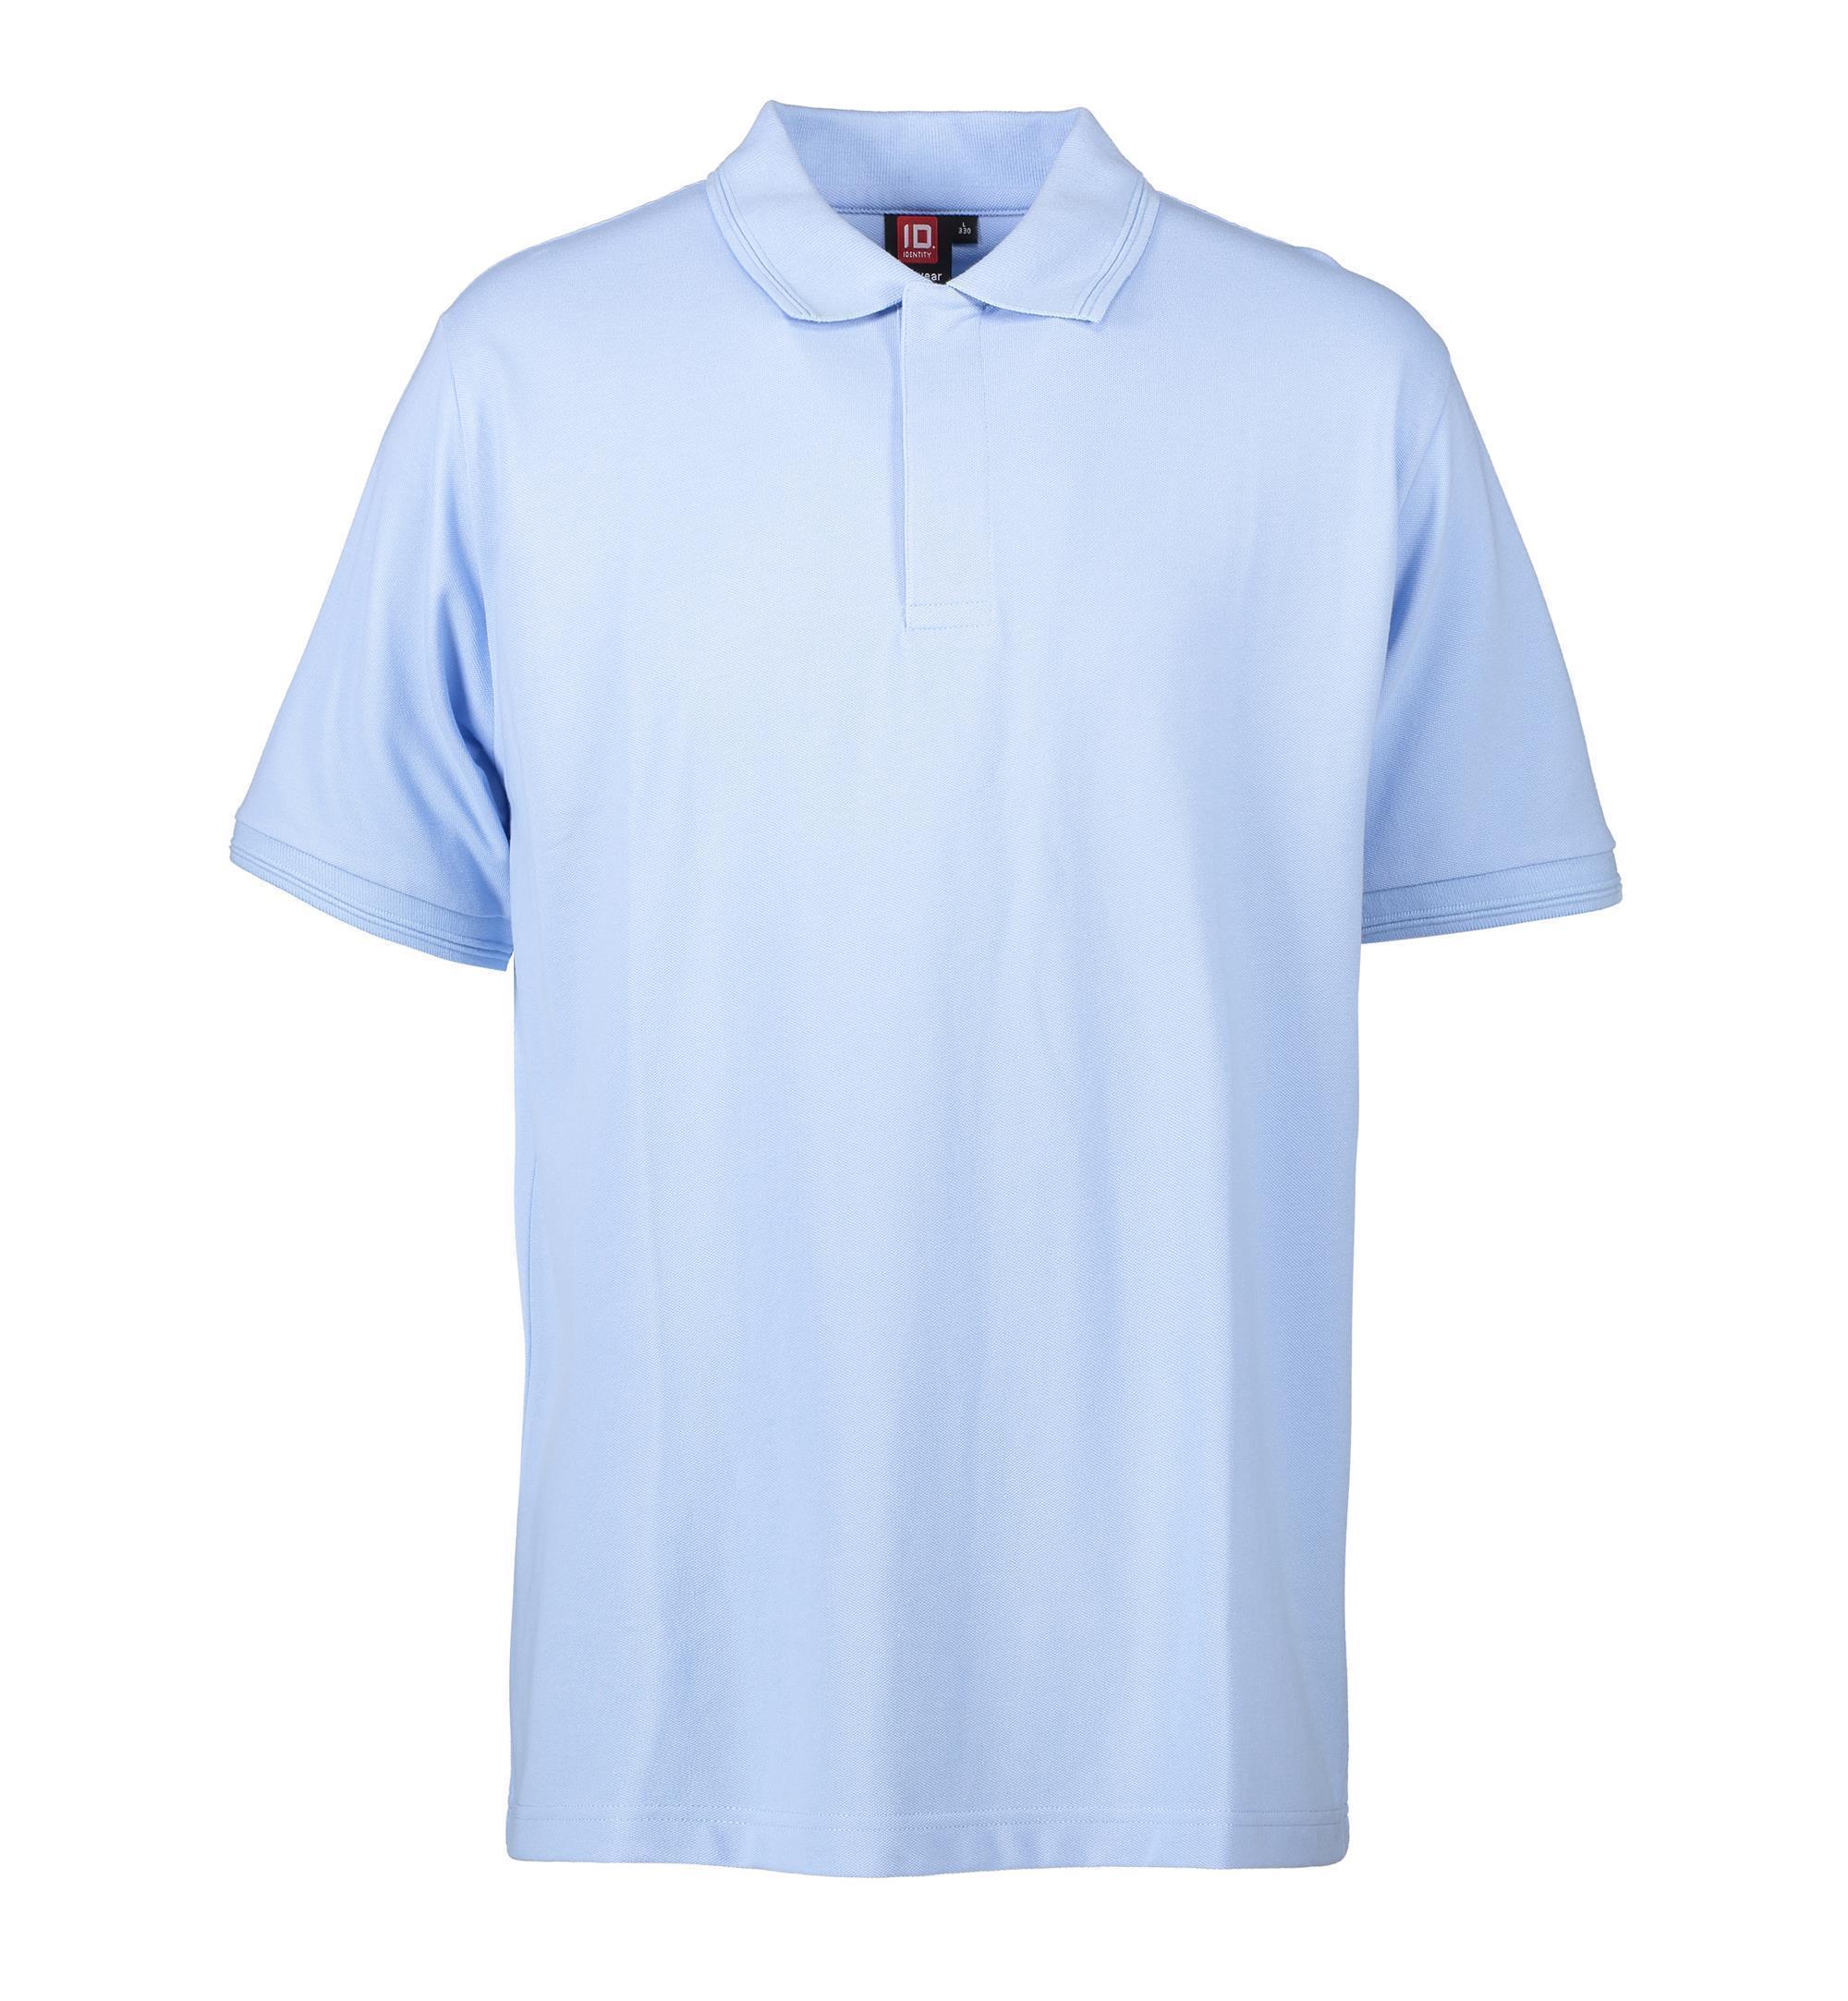 HACCP polo shirt short sleeve with press studs 210-220 g/m² ID Identity®